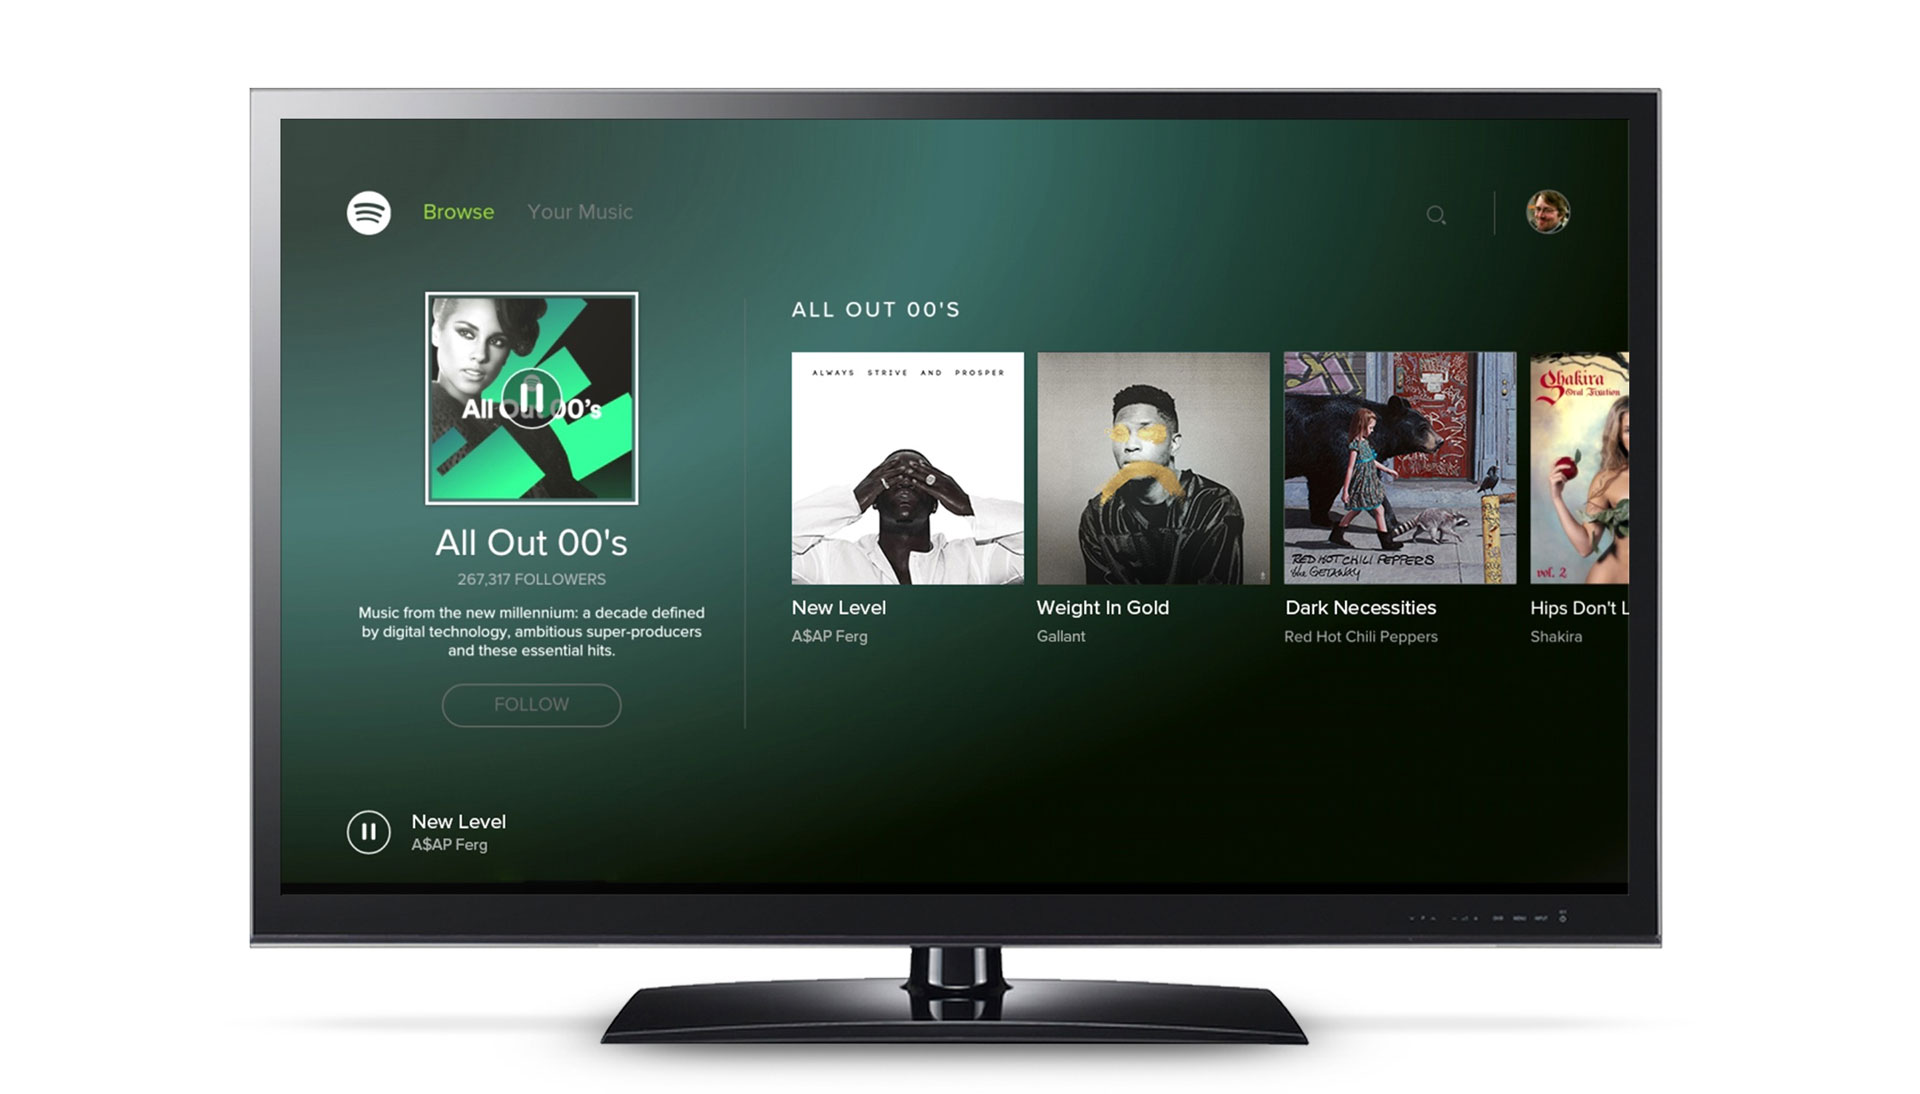 Spotify op Android TV